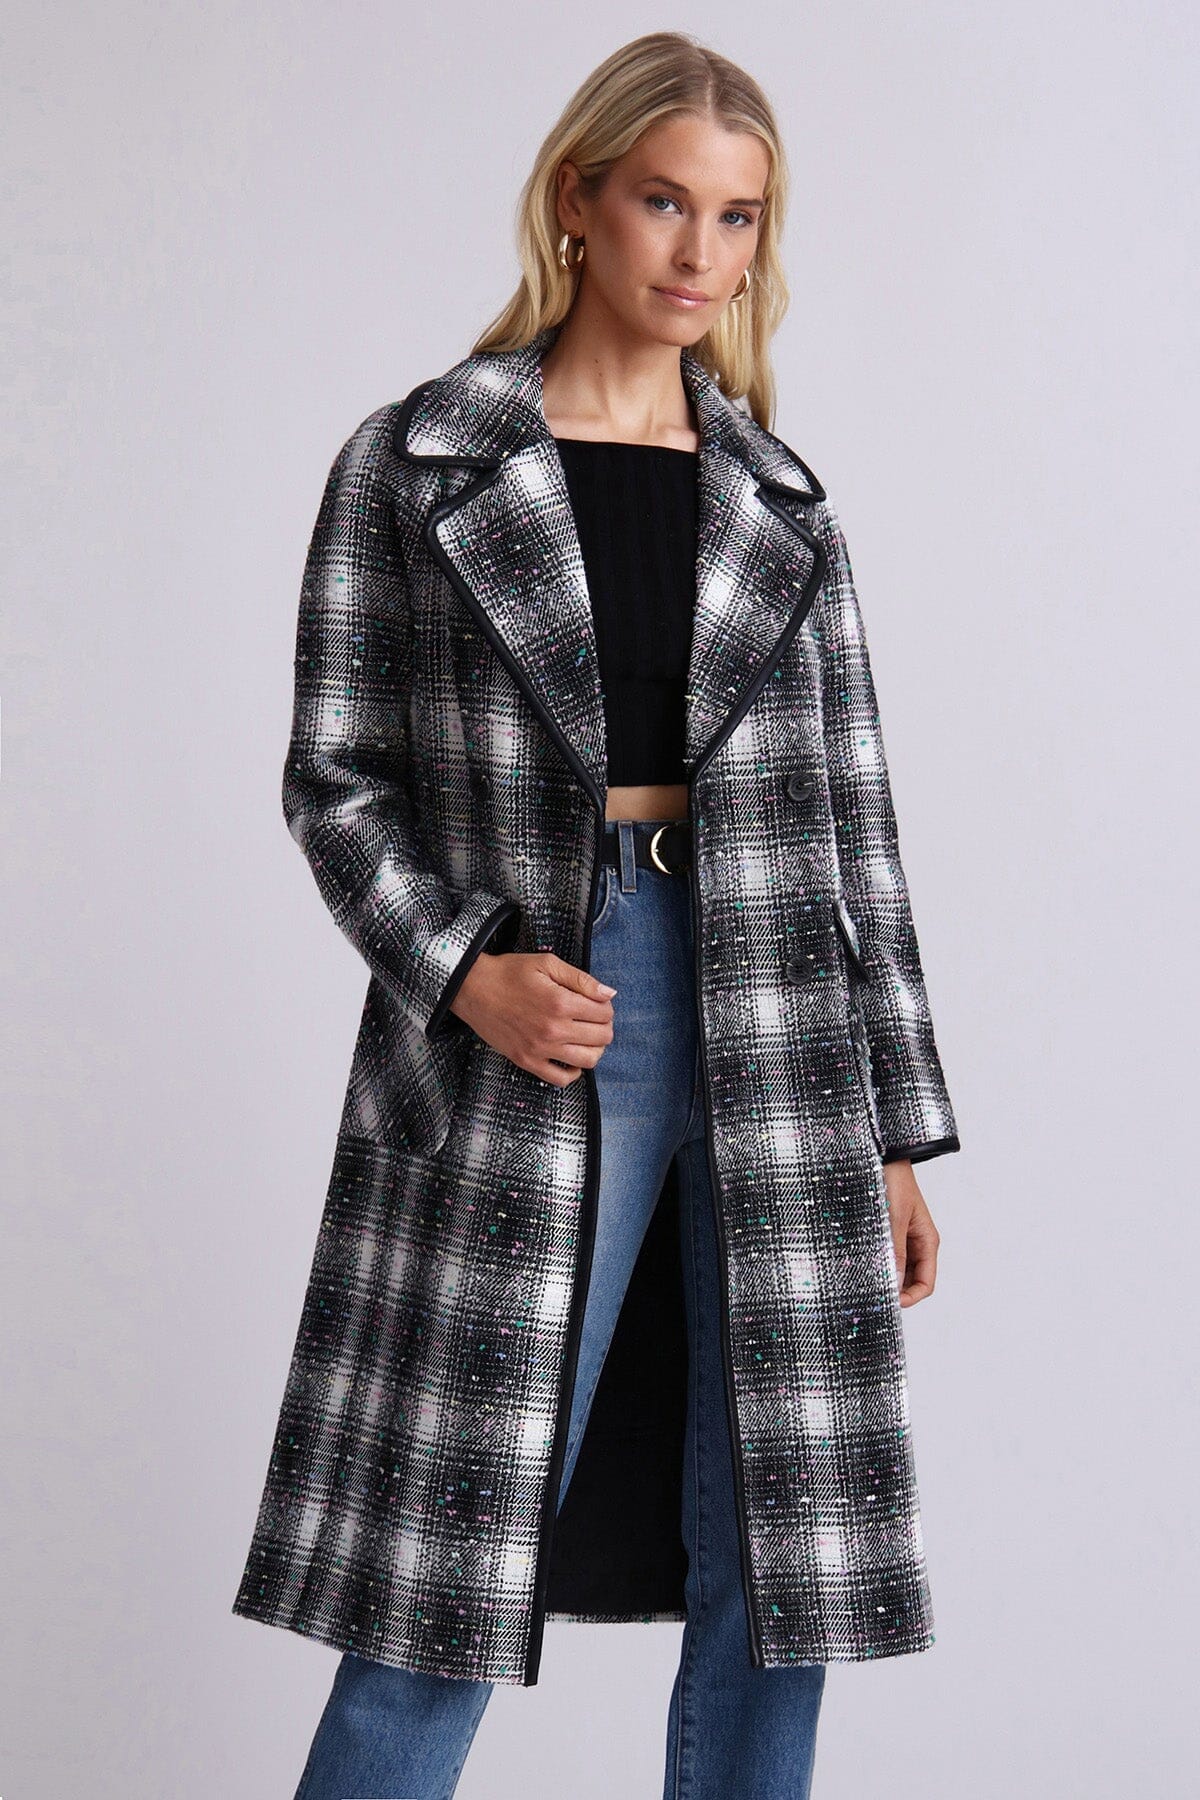 Black multi plaid tweed double breasted coat jacket - figure flattering office to date night long coats for women